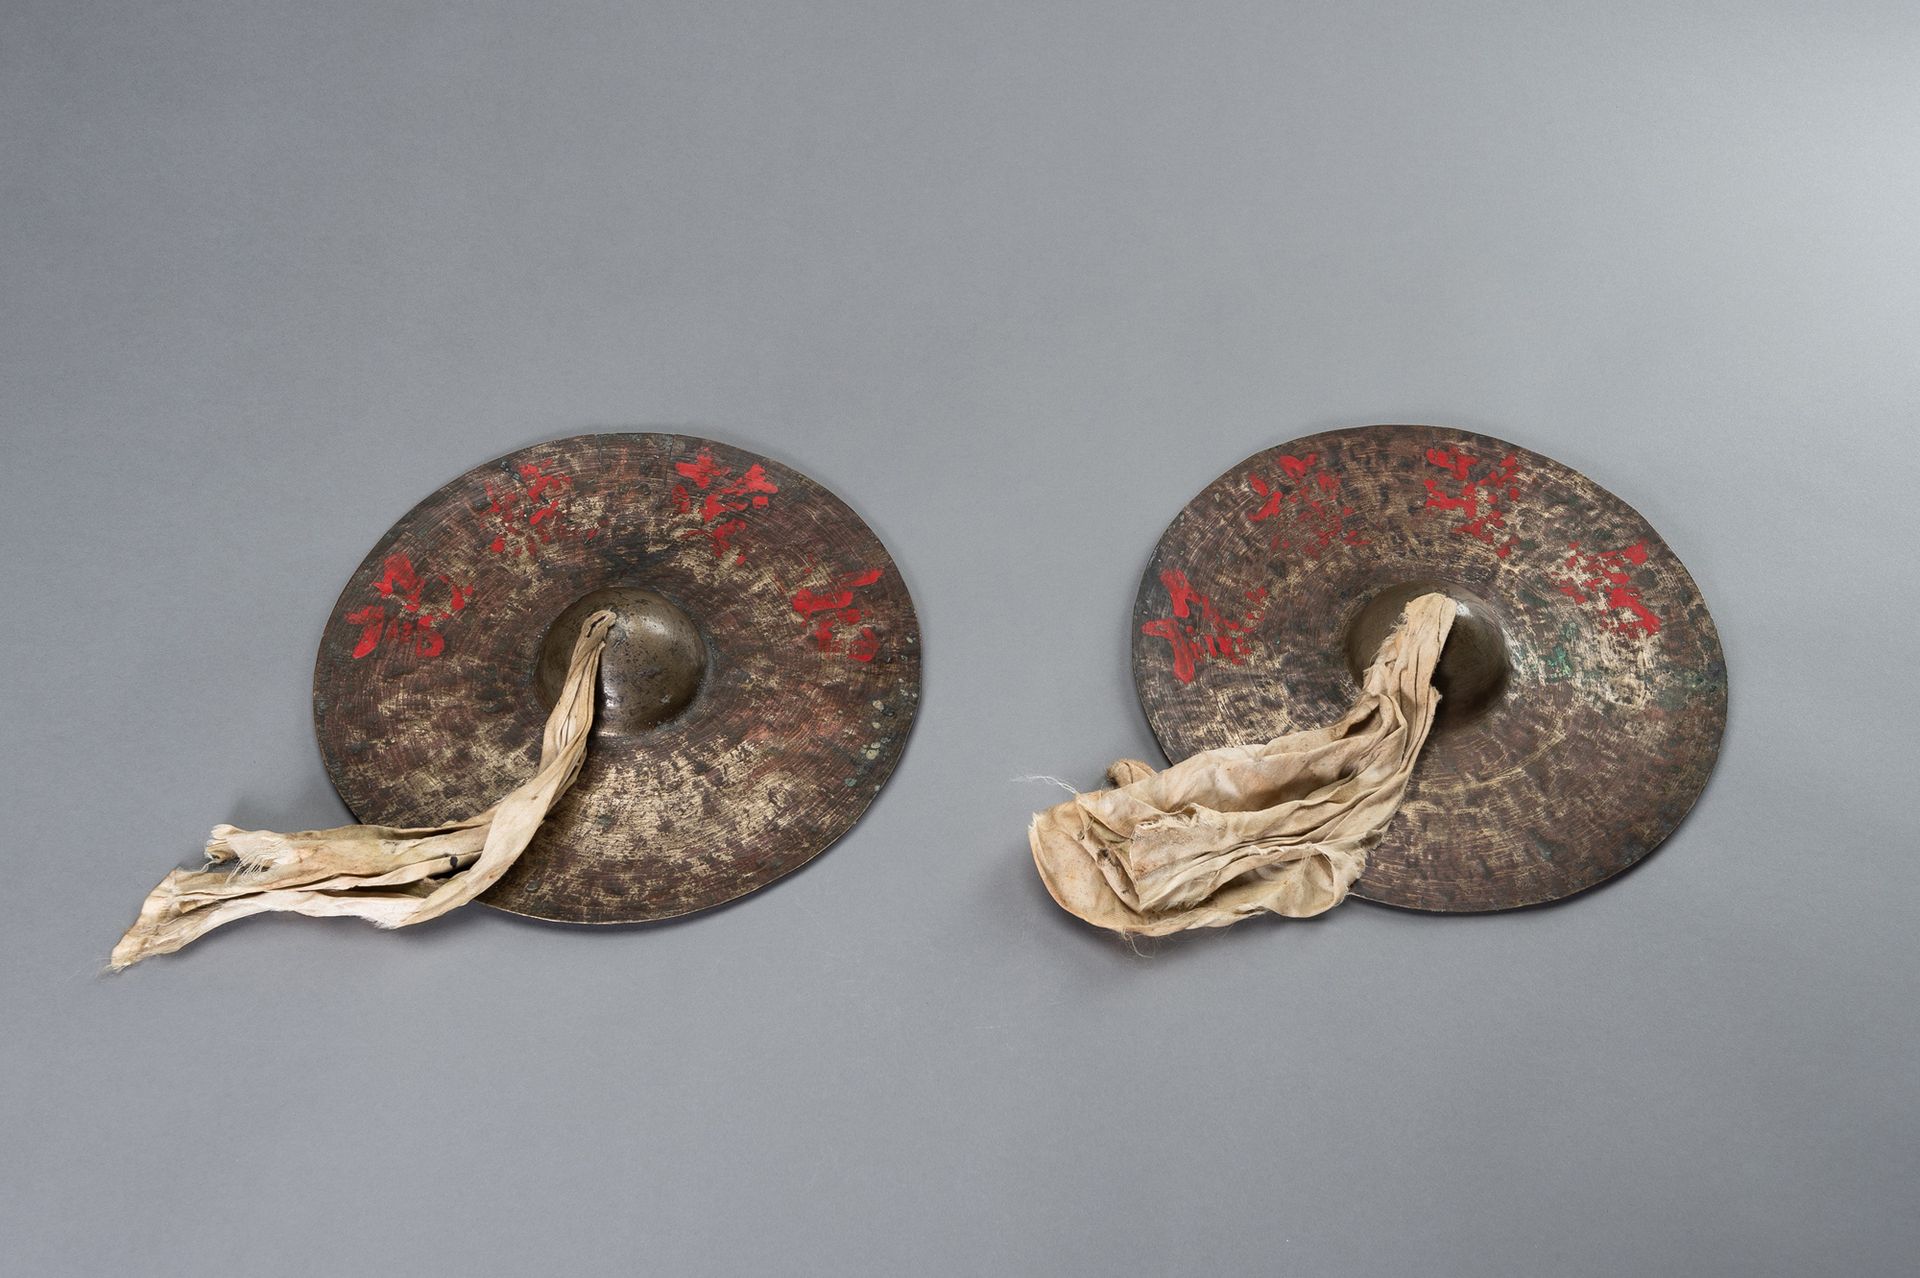 A PAIR OF BRONZE BO CYMBALS A PAIR OF BRONZE BO CYMBALS
Tibet, 19th century. Eac&hellip;